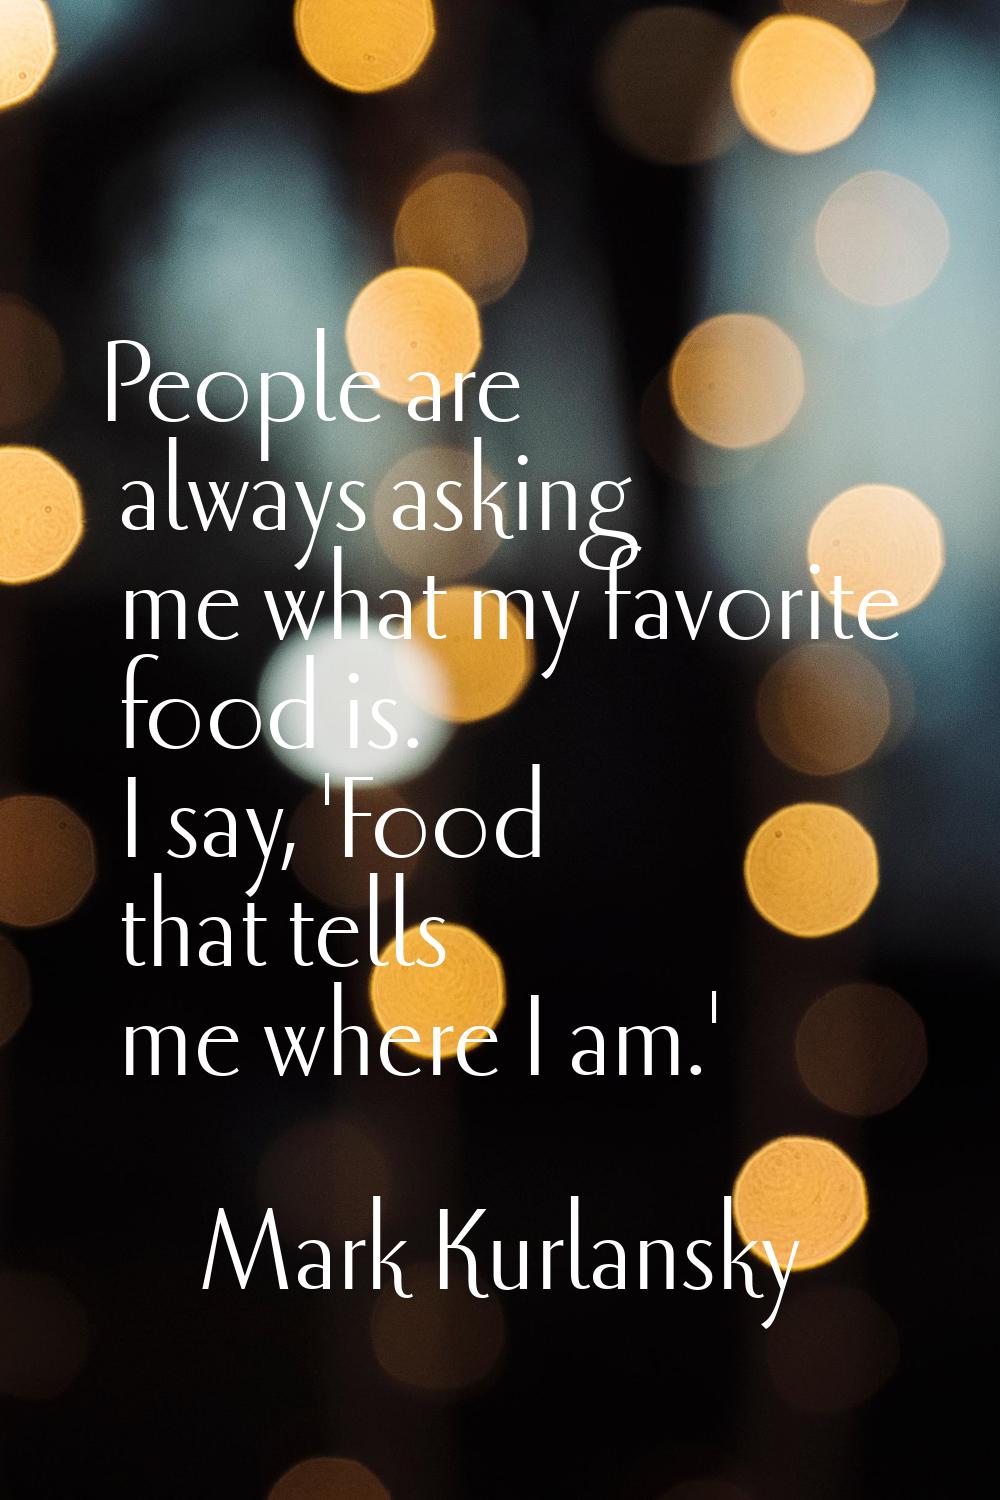 People are always asking me what my favorite food is. I say, 'Food that tells me where I am.'